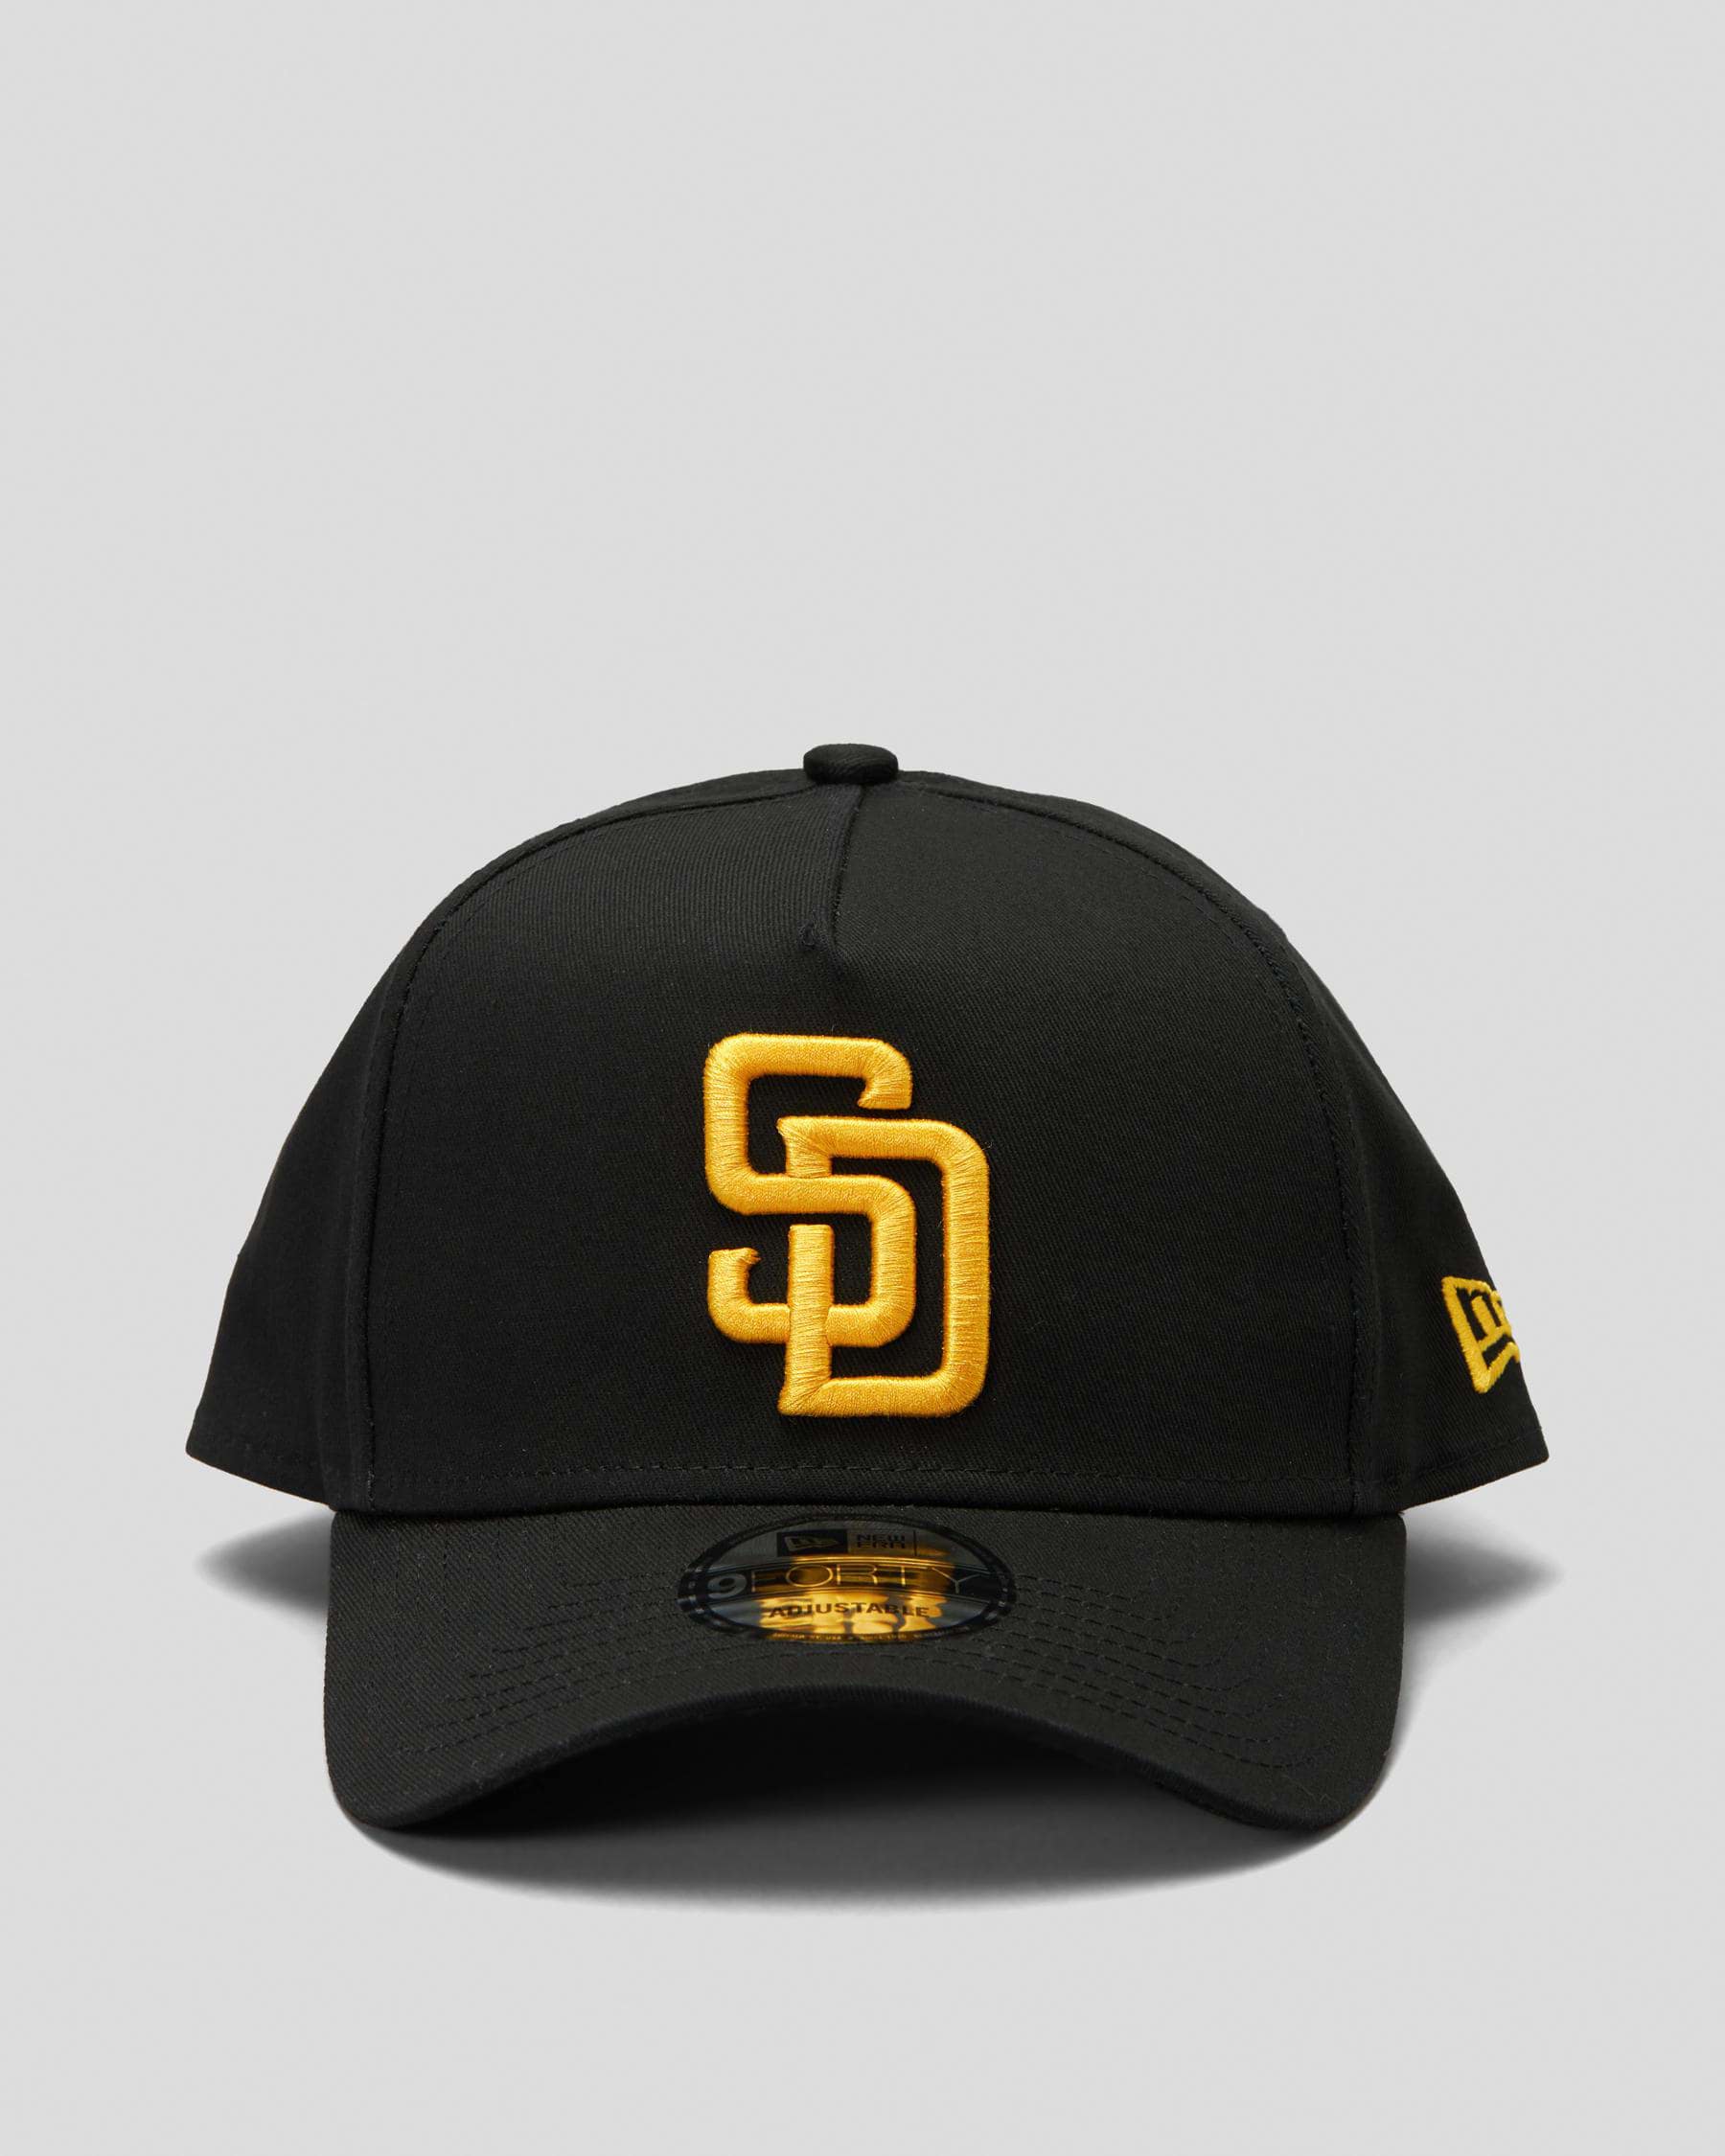 padres hat outfits